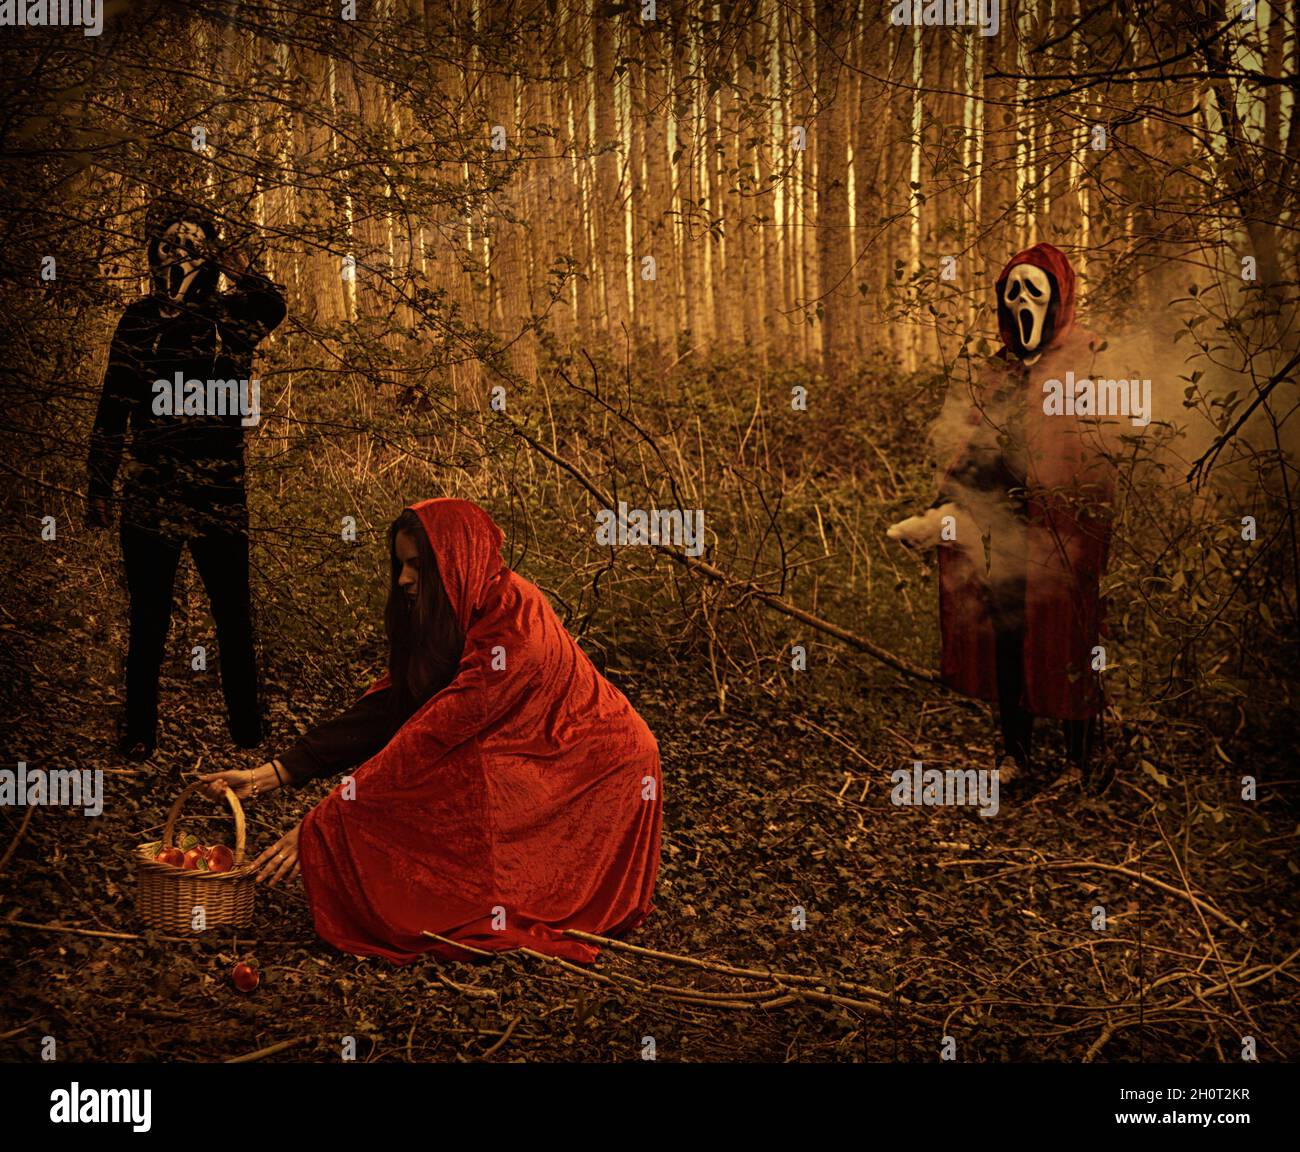 Little red riding Hood with masked person in black standing behind. Shot in shady woodland. Stock Photo